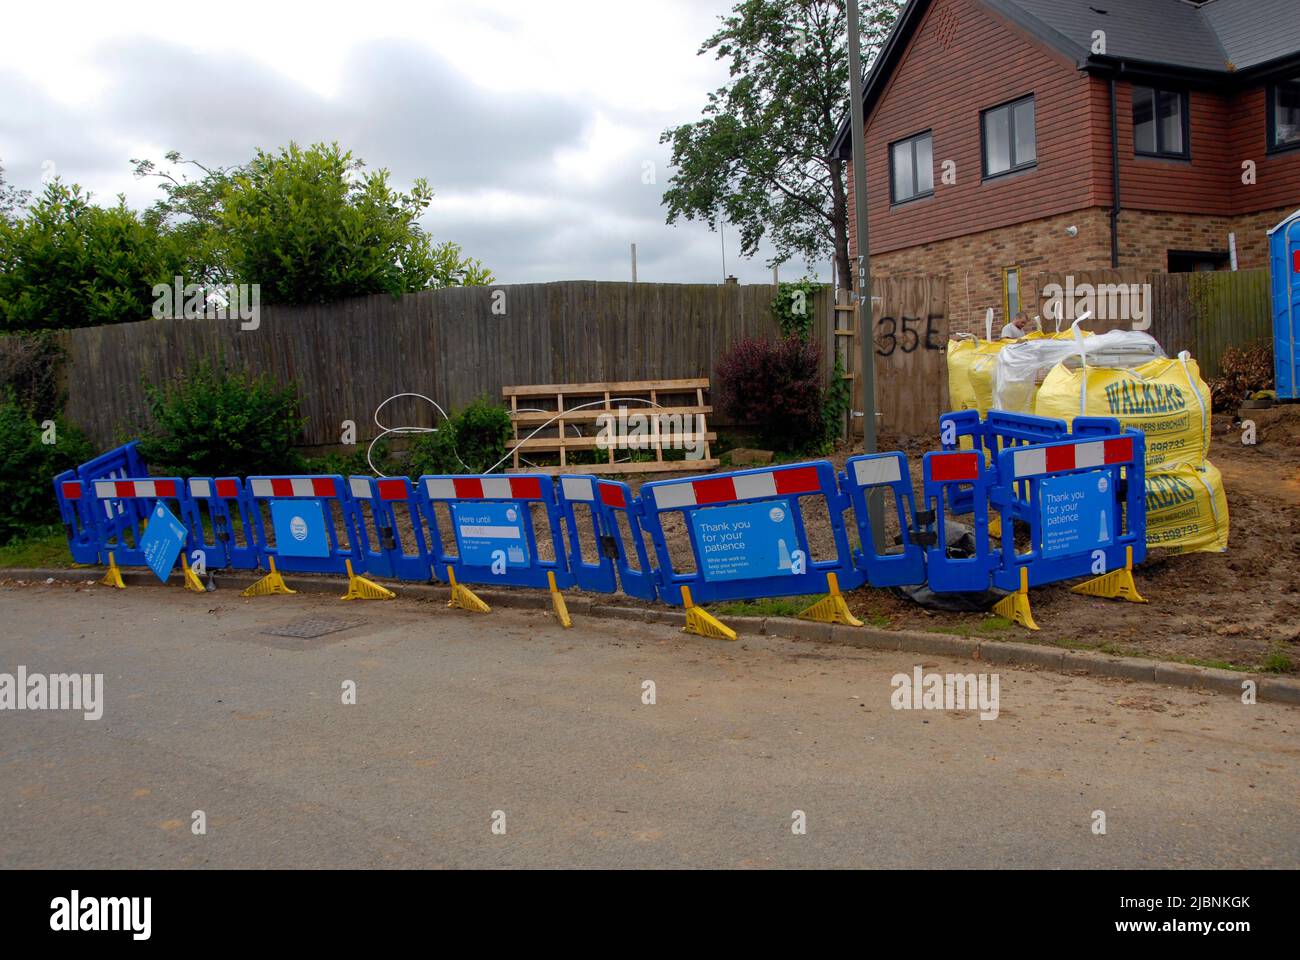 Barriers put up by water board contractors after connecting services to new house, with waste left leaning against neighboring fence Stock Photo